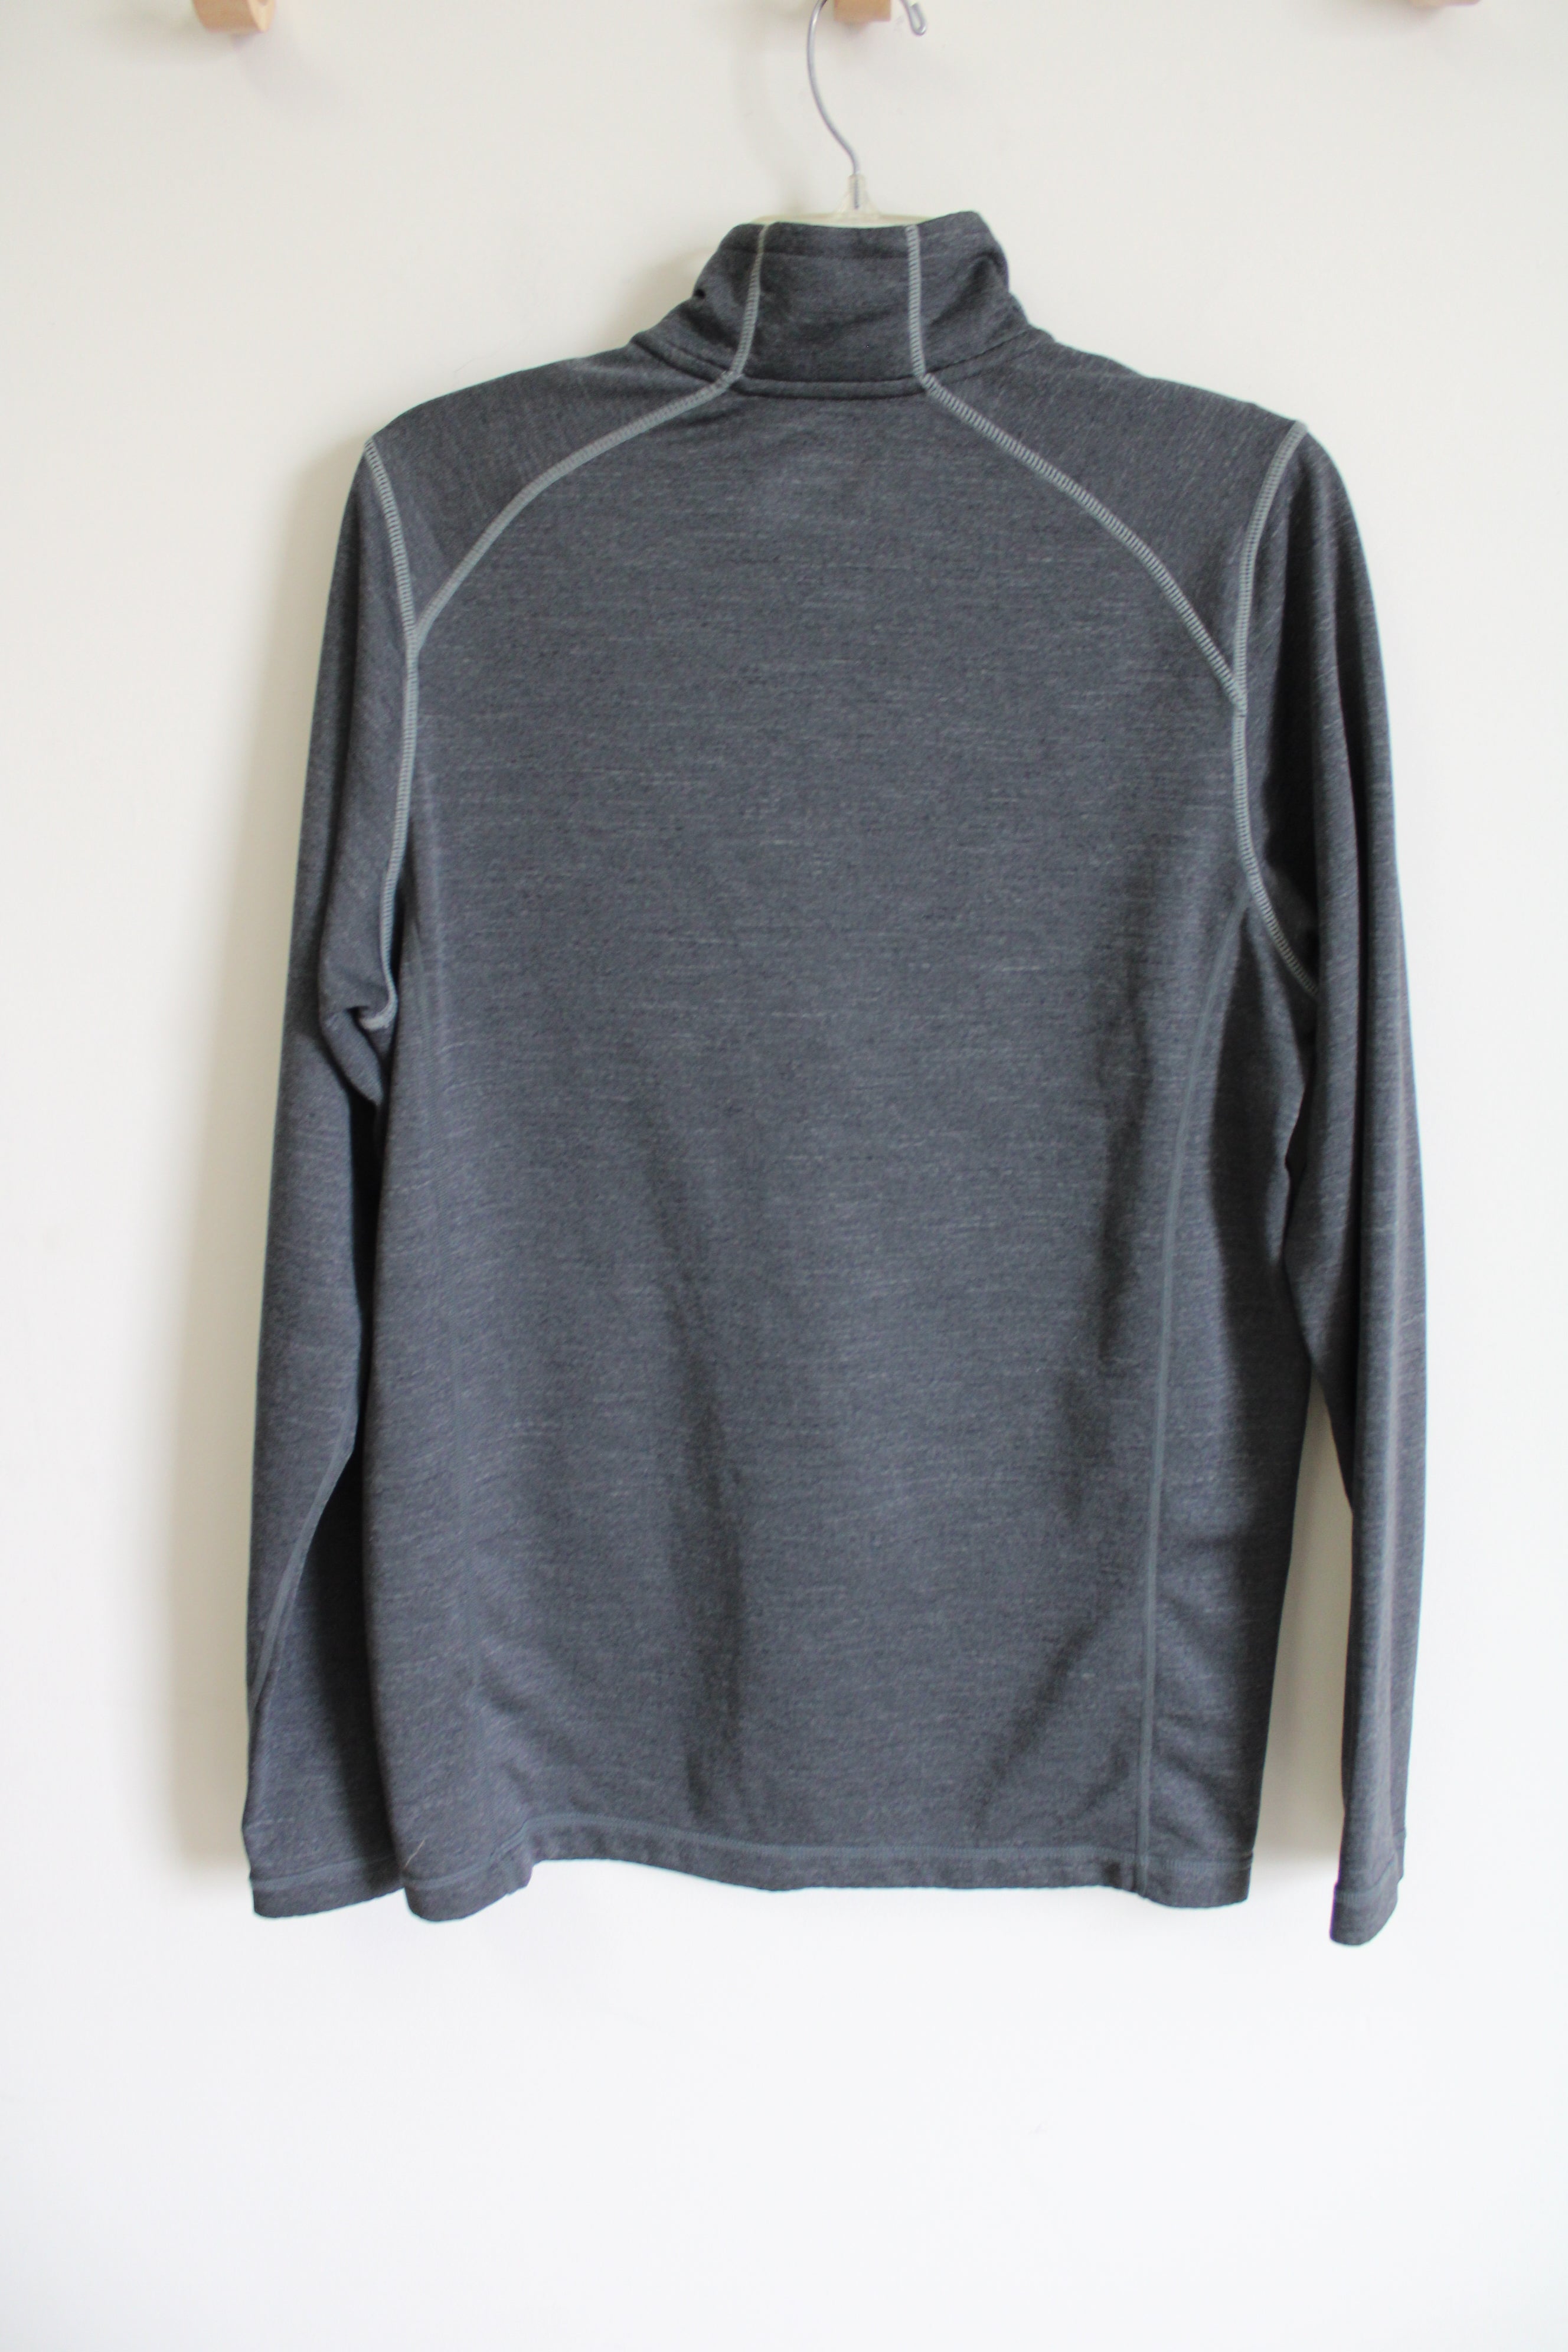 Eastern Mountain Sports Tech Wick Gray Pullover | M